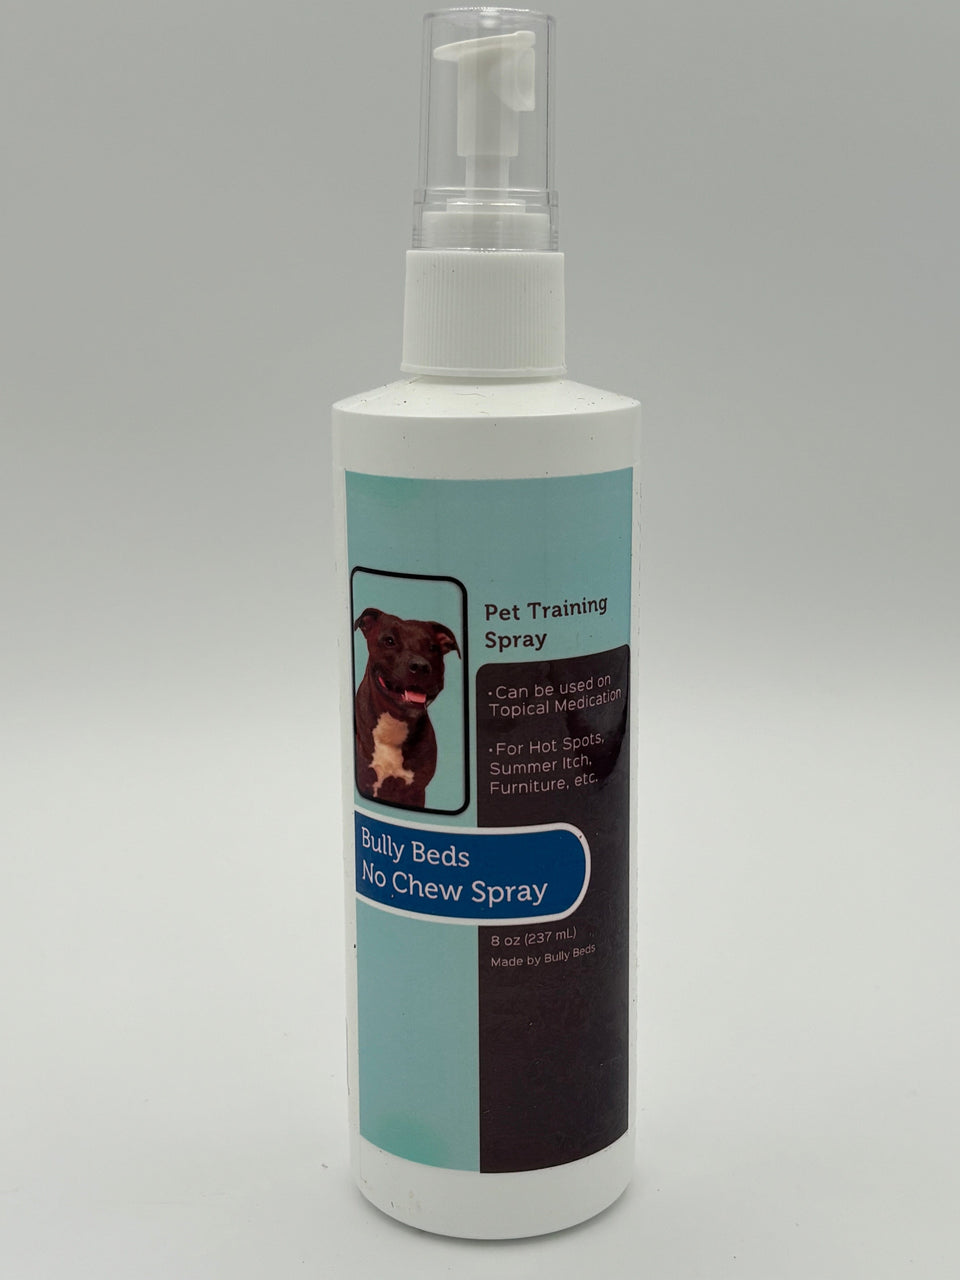 No Chew Spray for Dogs (All Natural) Bullybeds.com 